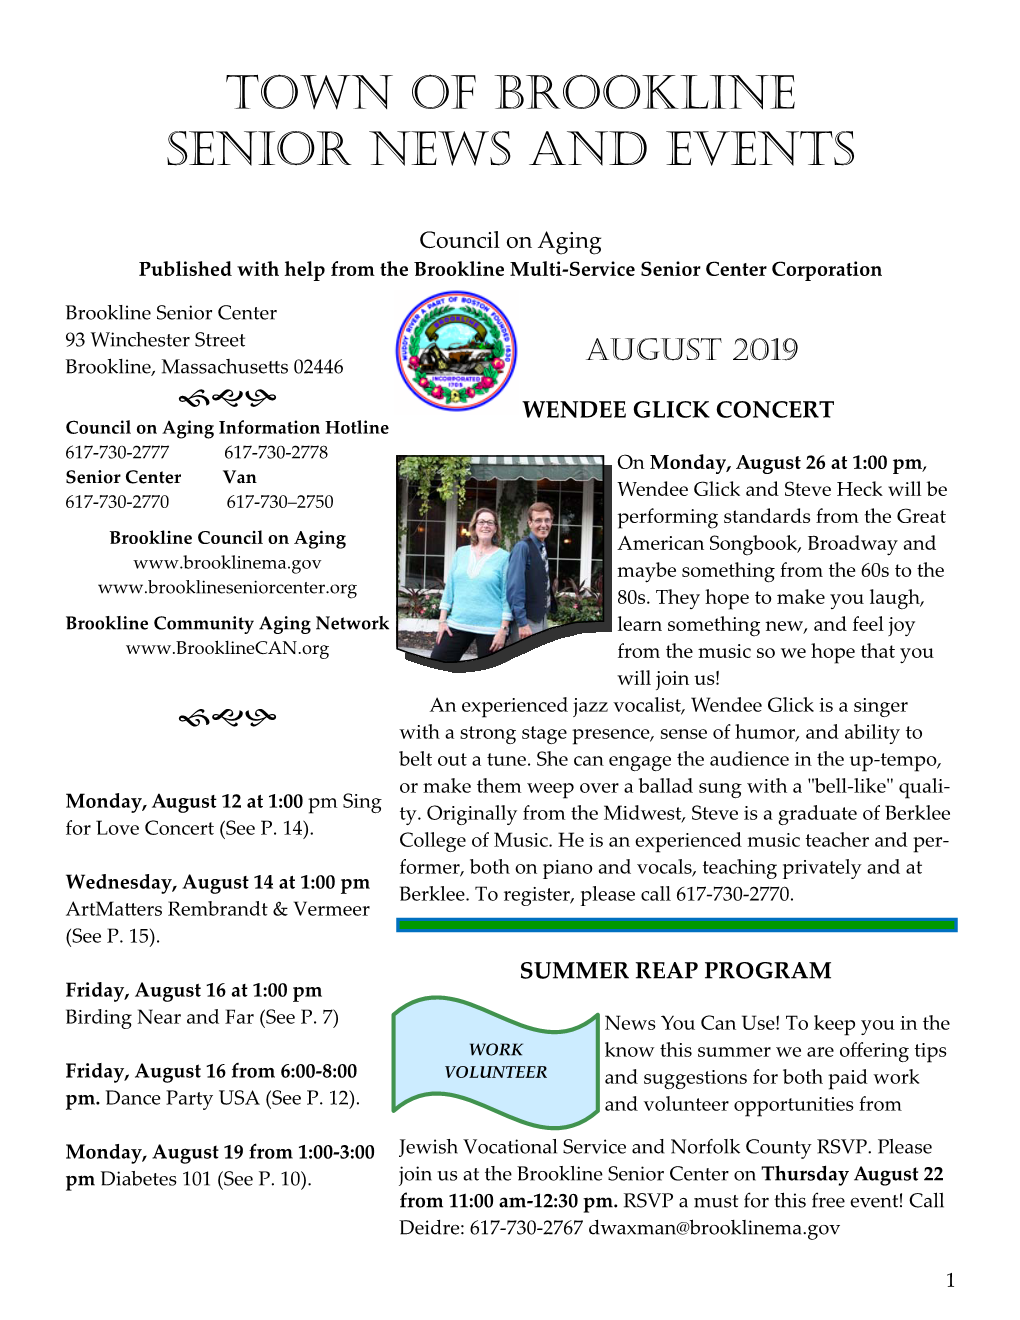 Town of Brookline Senior News and Events